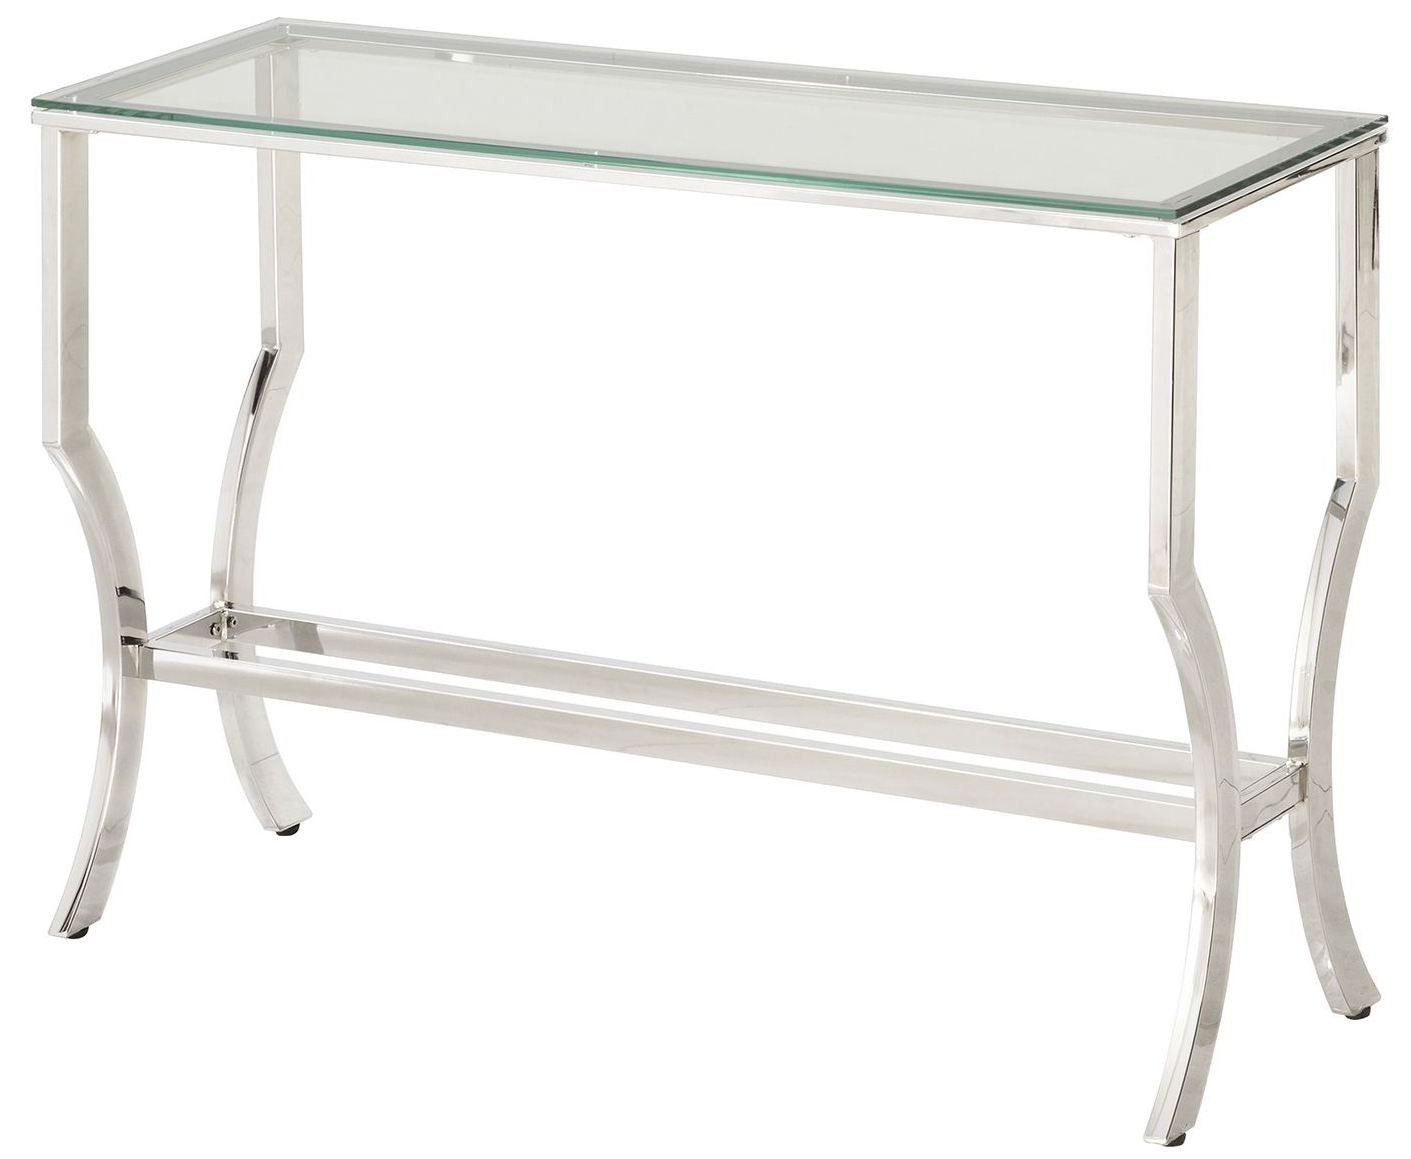 Chrome And Tempered Glass Sofa Table From Coaster Regarding Chrome And Glass Rectangular Console Tables (Photo 11 of 20)